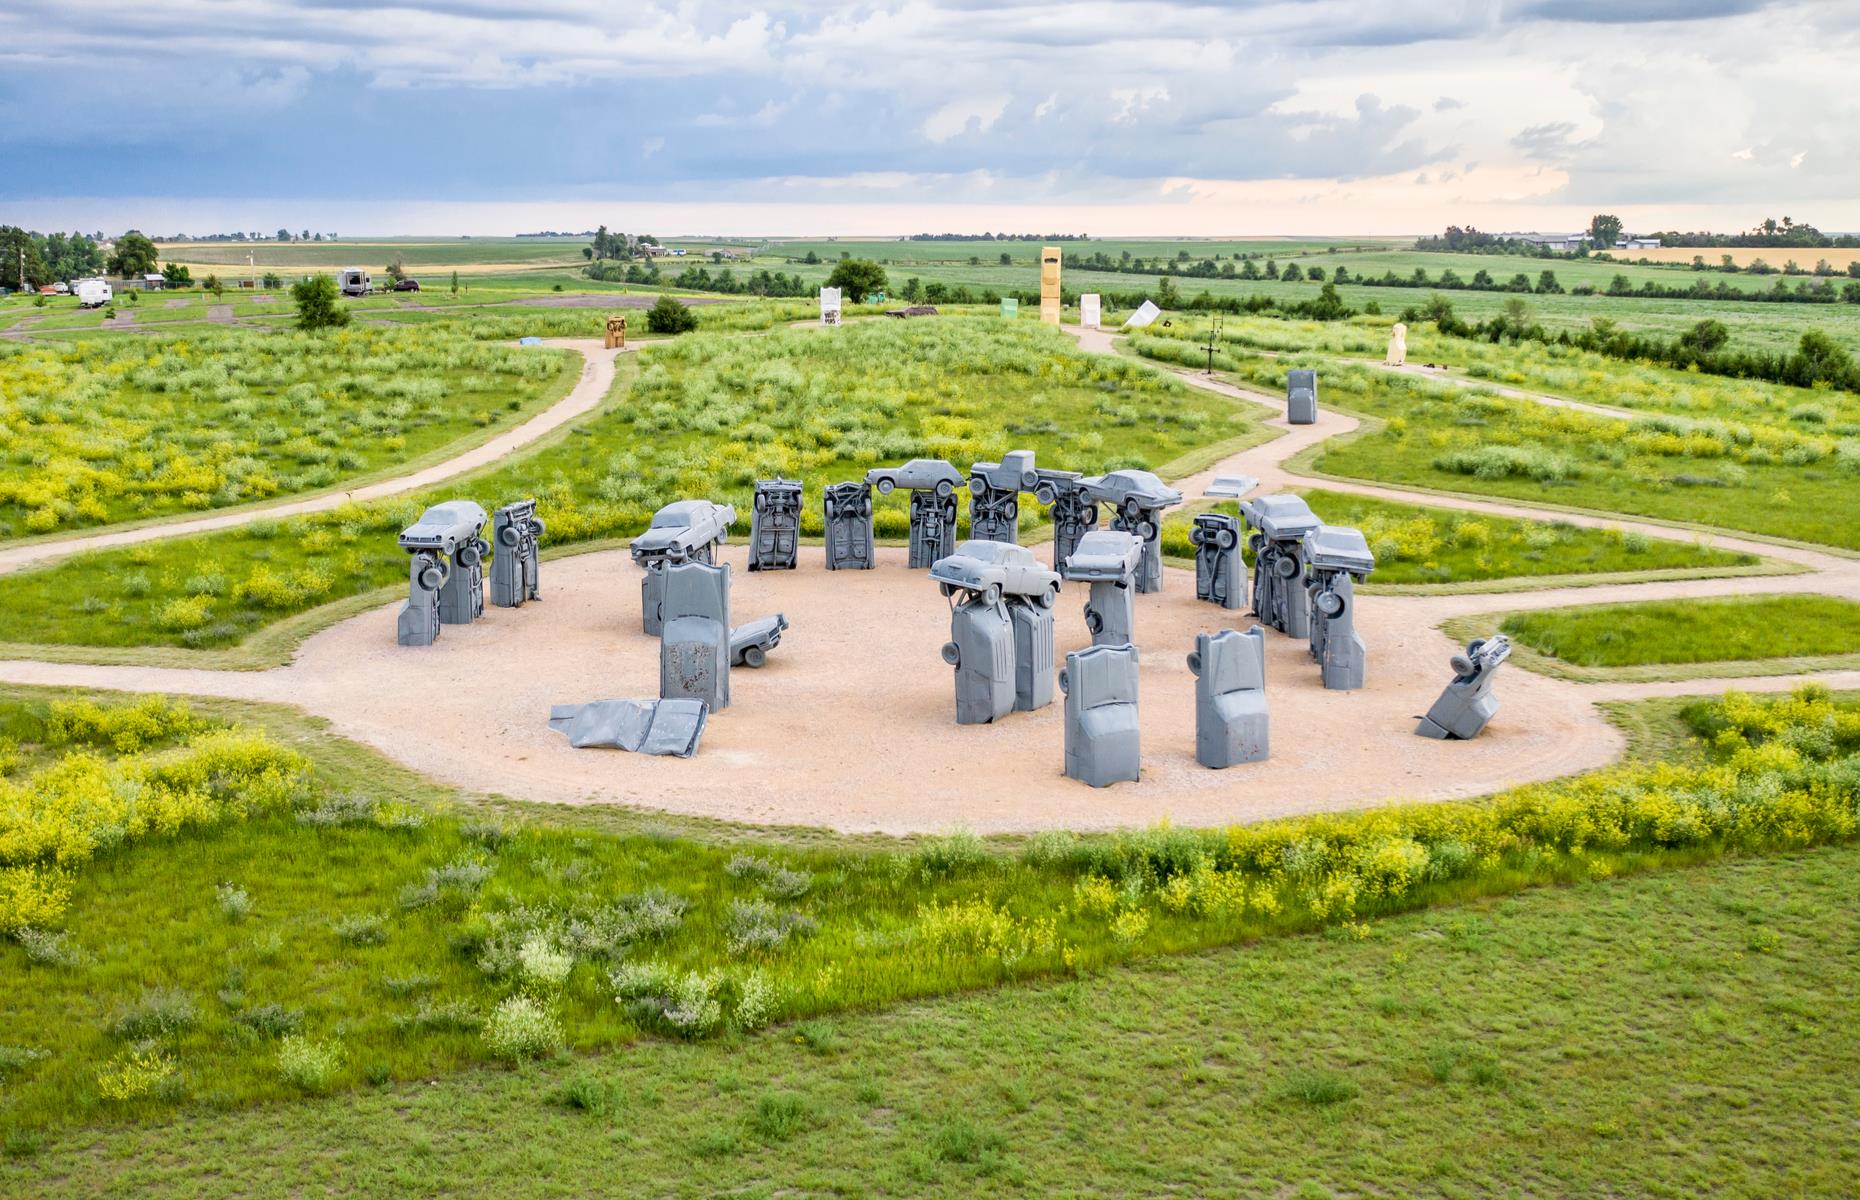 <p>Stonehenge might be shrouded in mystery but, in Nebraska, it’s all about <a href="https://carhenge.com/">Carhenge</a>. This curious sculpture, off Highway 59, was created in 1987 by Jim Reinders as a tribute to his father. He used 39 old cars to replicate the original Neolithic stone circle which is in Salisbury, England, UK.</p>  <p><a href="https://www.loveexploring.com/gallerylist/89068/the-most-mysterious-places-on-earth"><strong>These are the most mysterious places on Earth</strong></a></p>